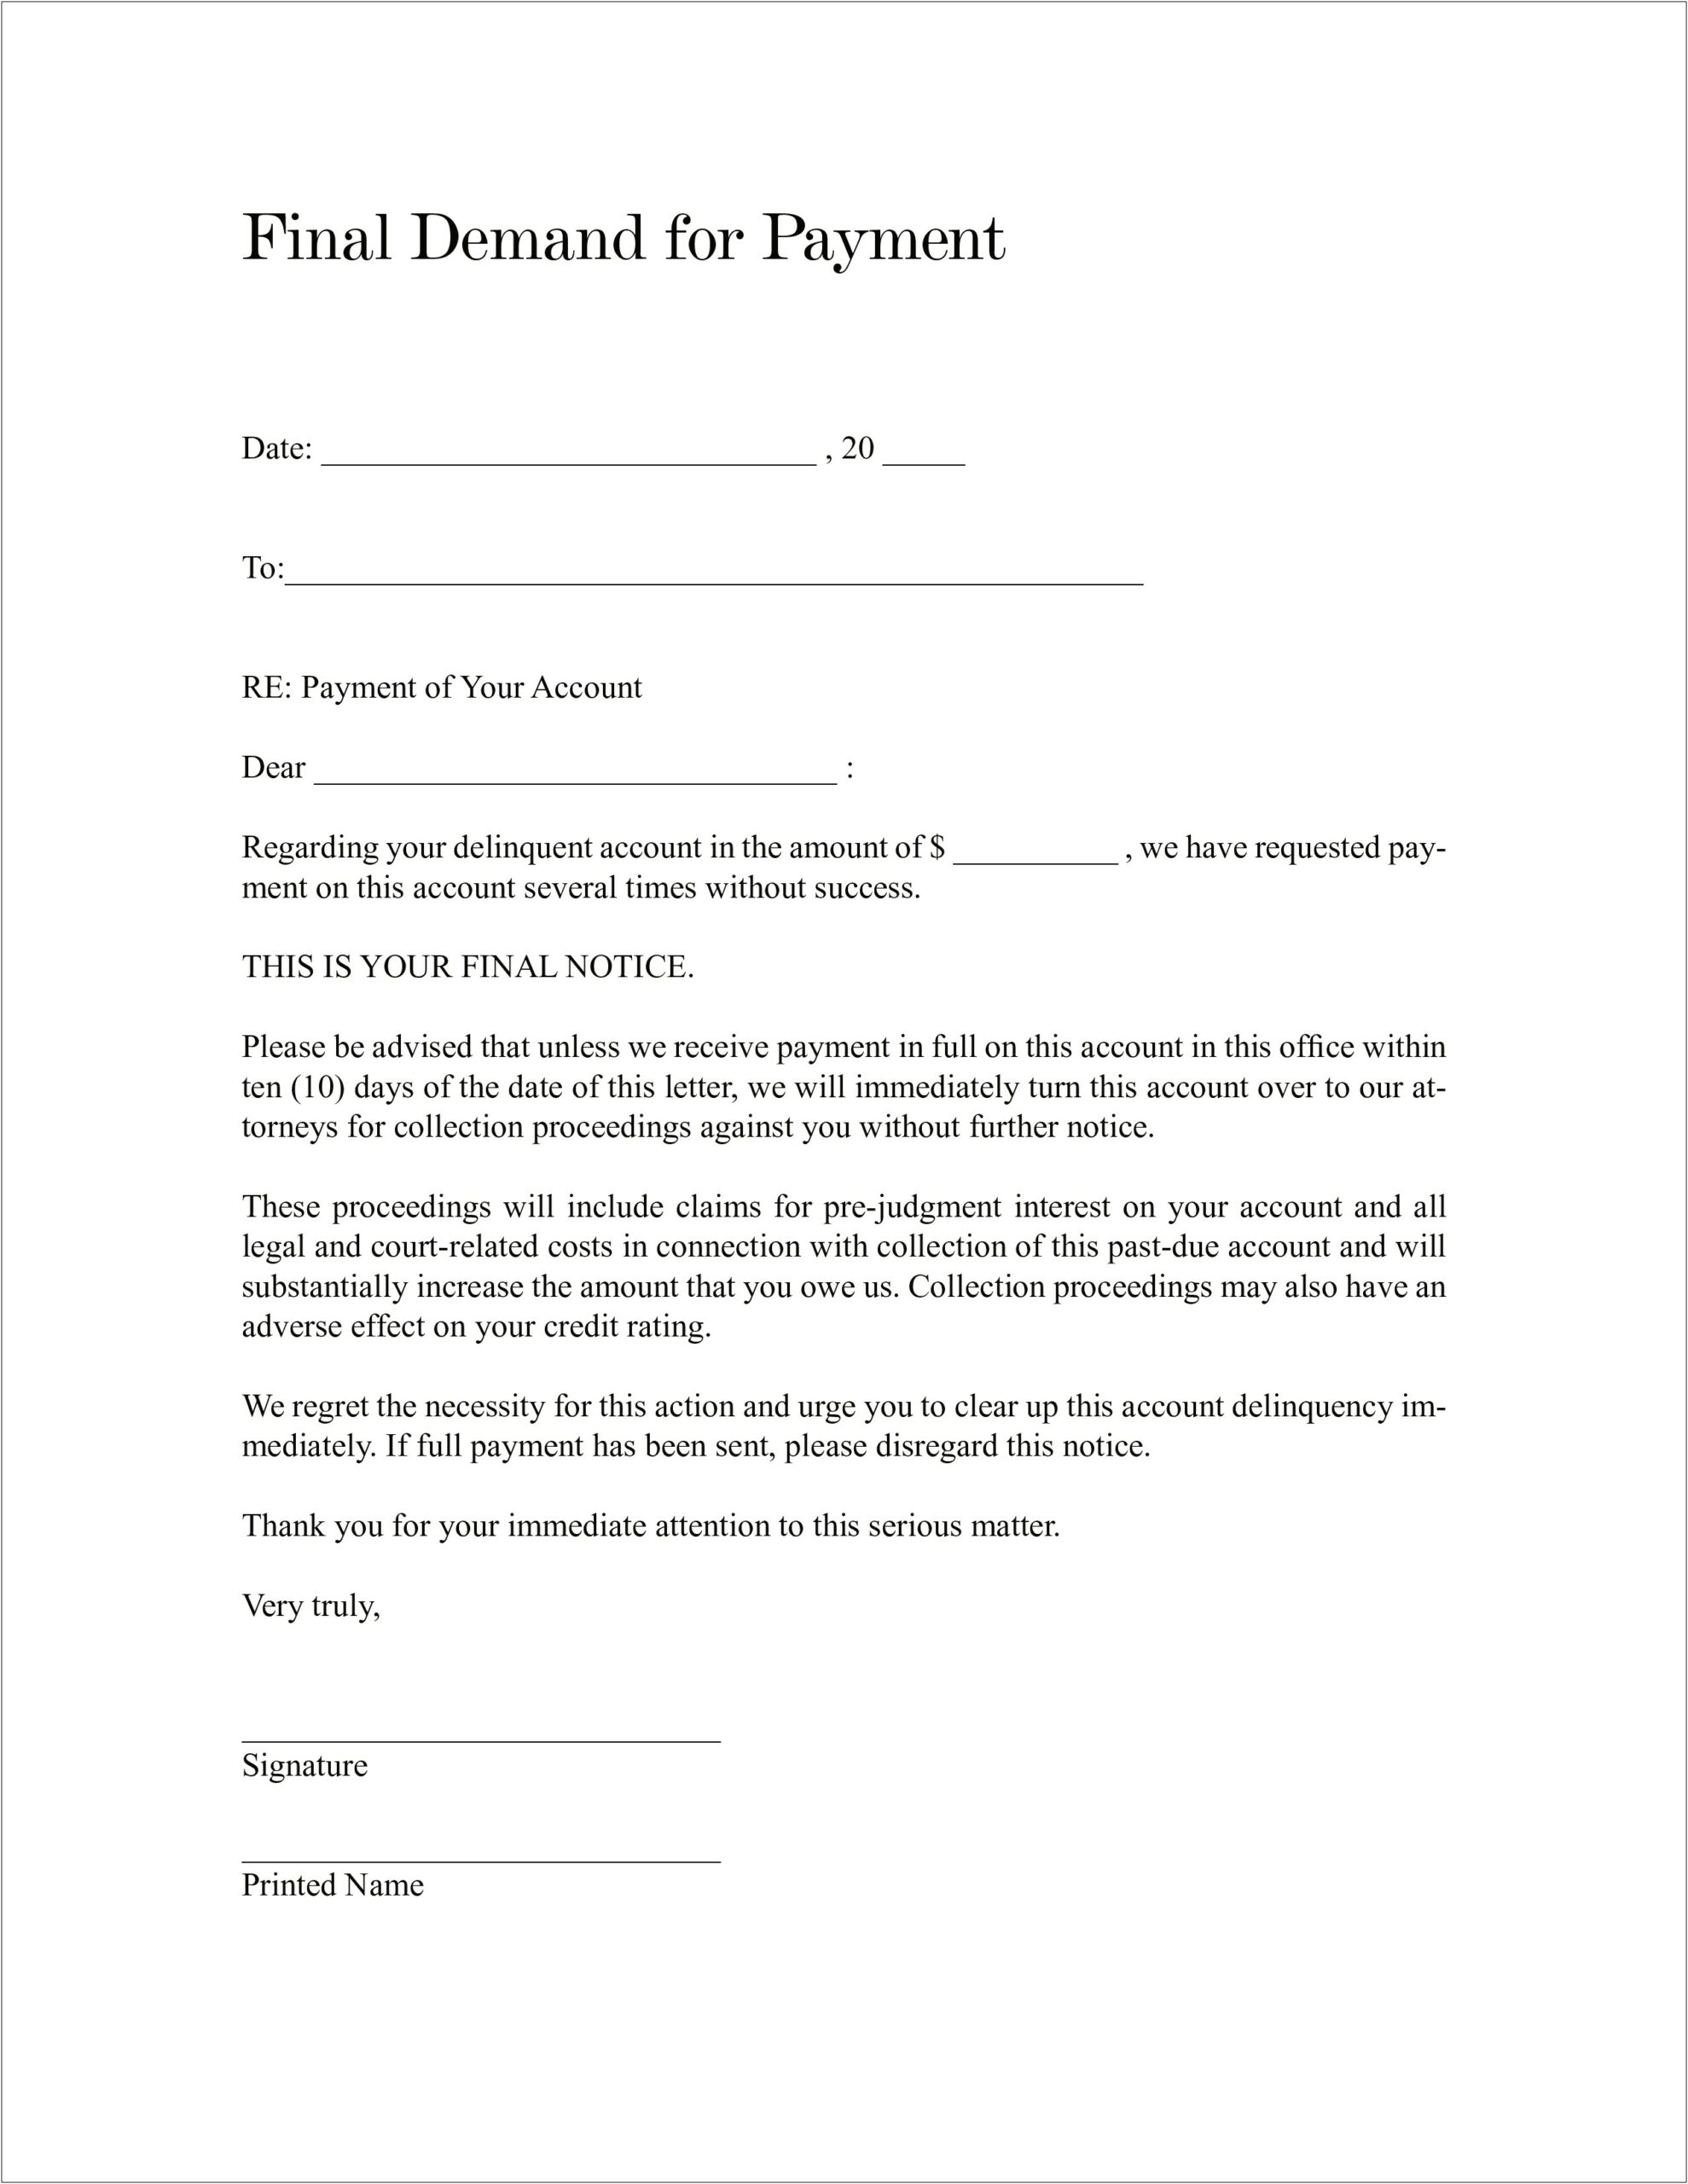 Final Notice Letter For Payment Template